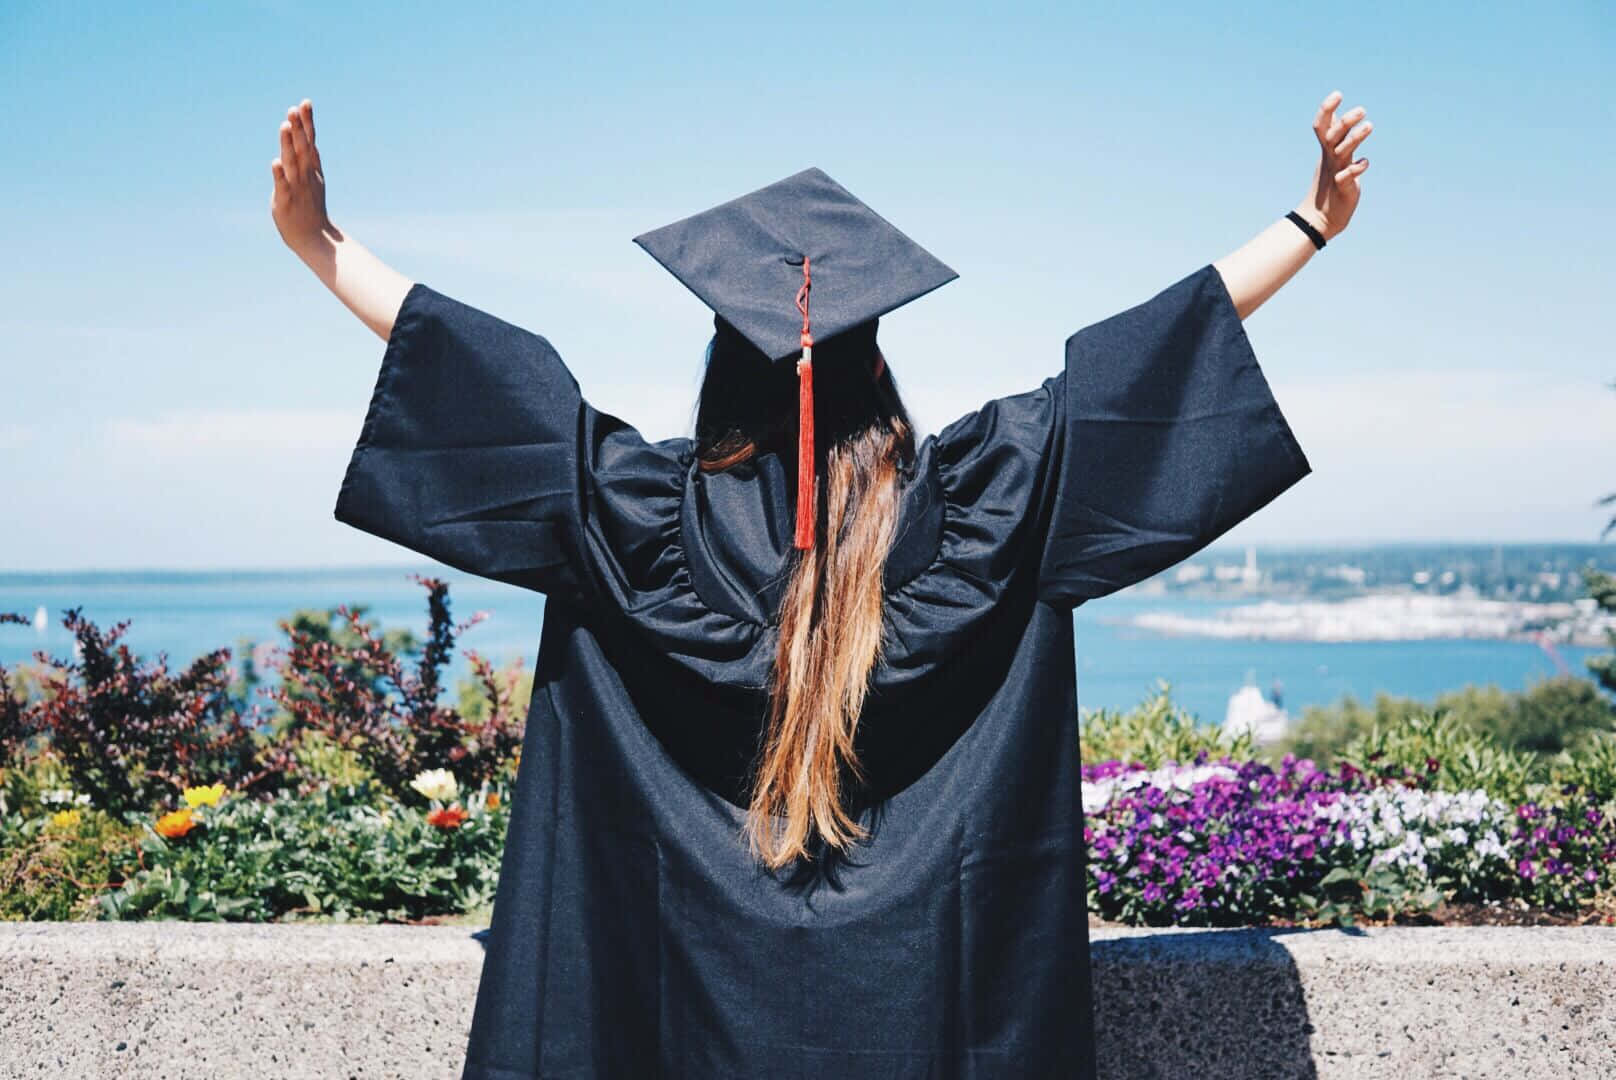 A Woman In A Graduation Gown With Her Arms Raised